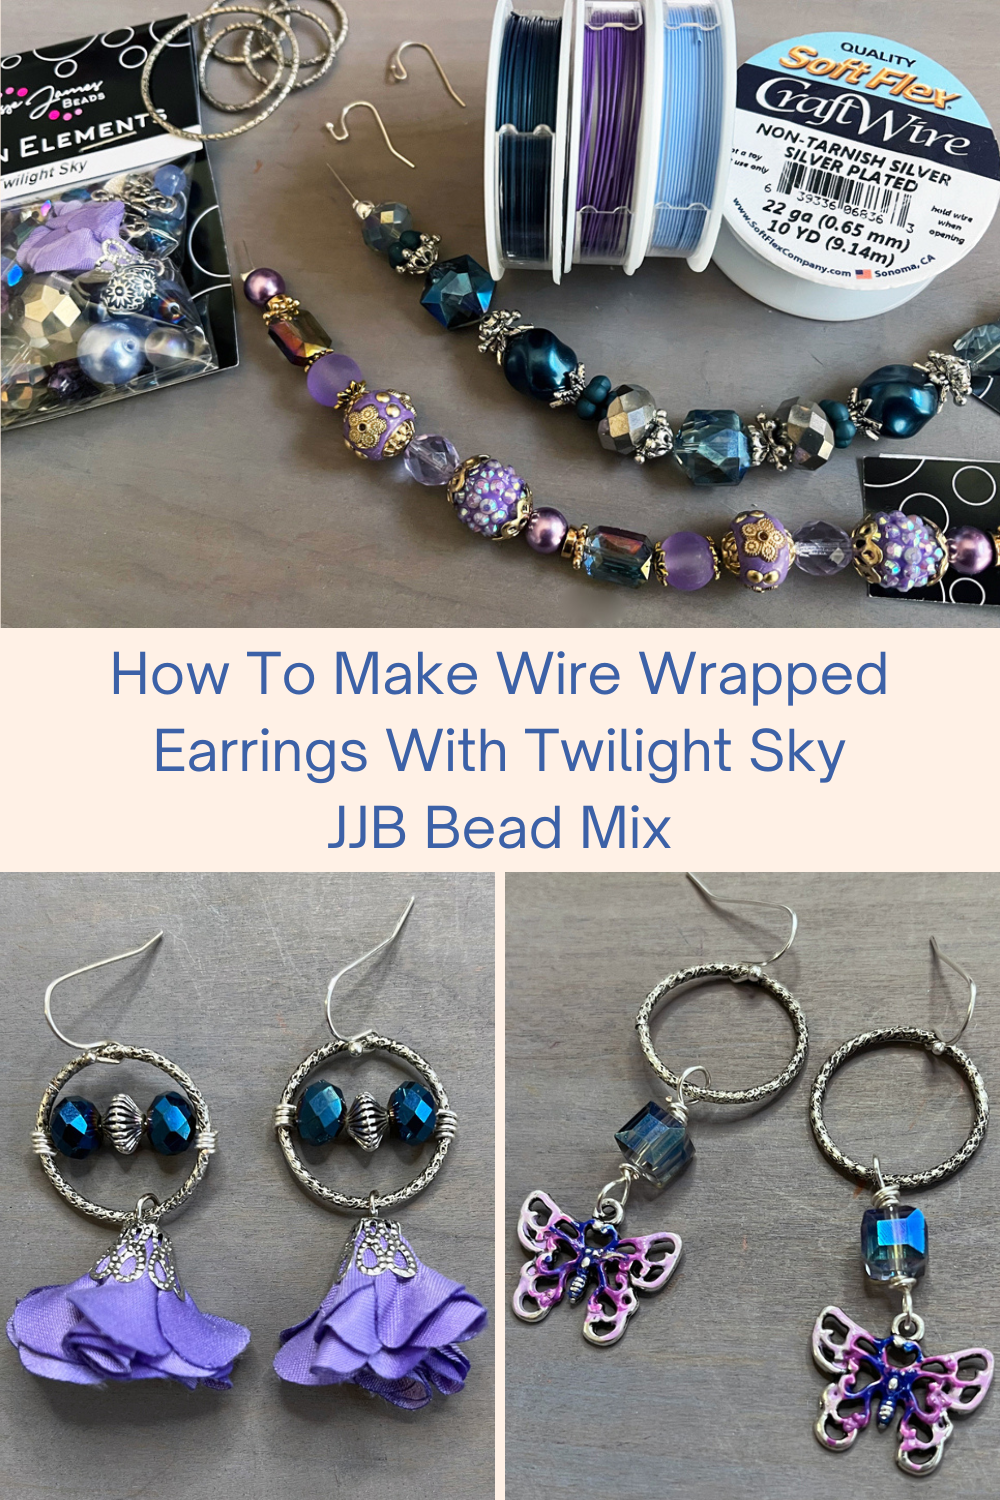 How To Make Wire Wrapped Earrings With Twilight Sky JJB Bead Mix Collage